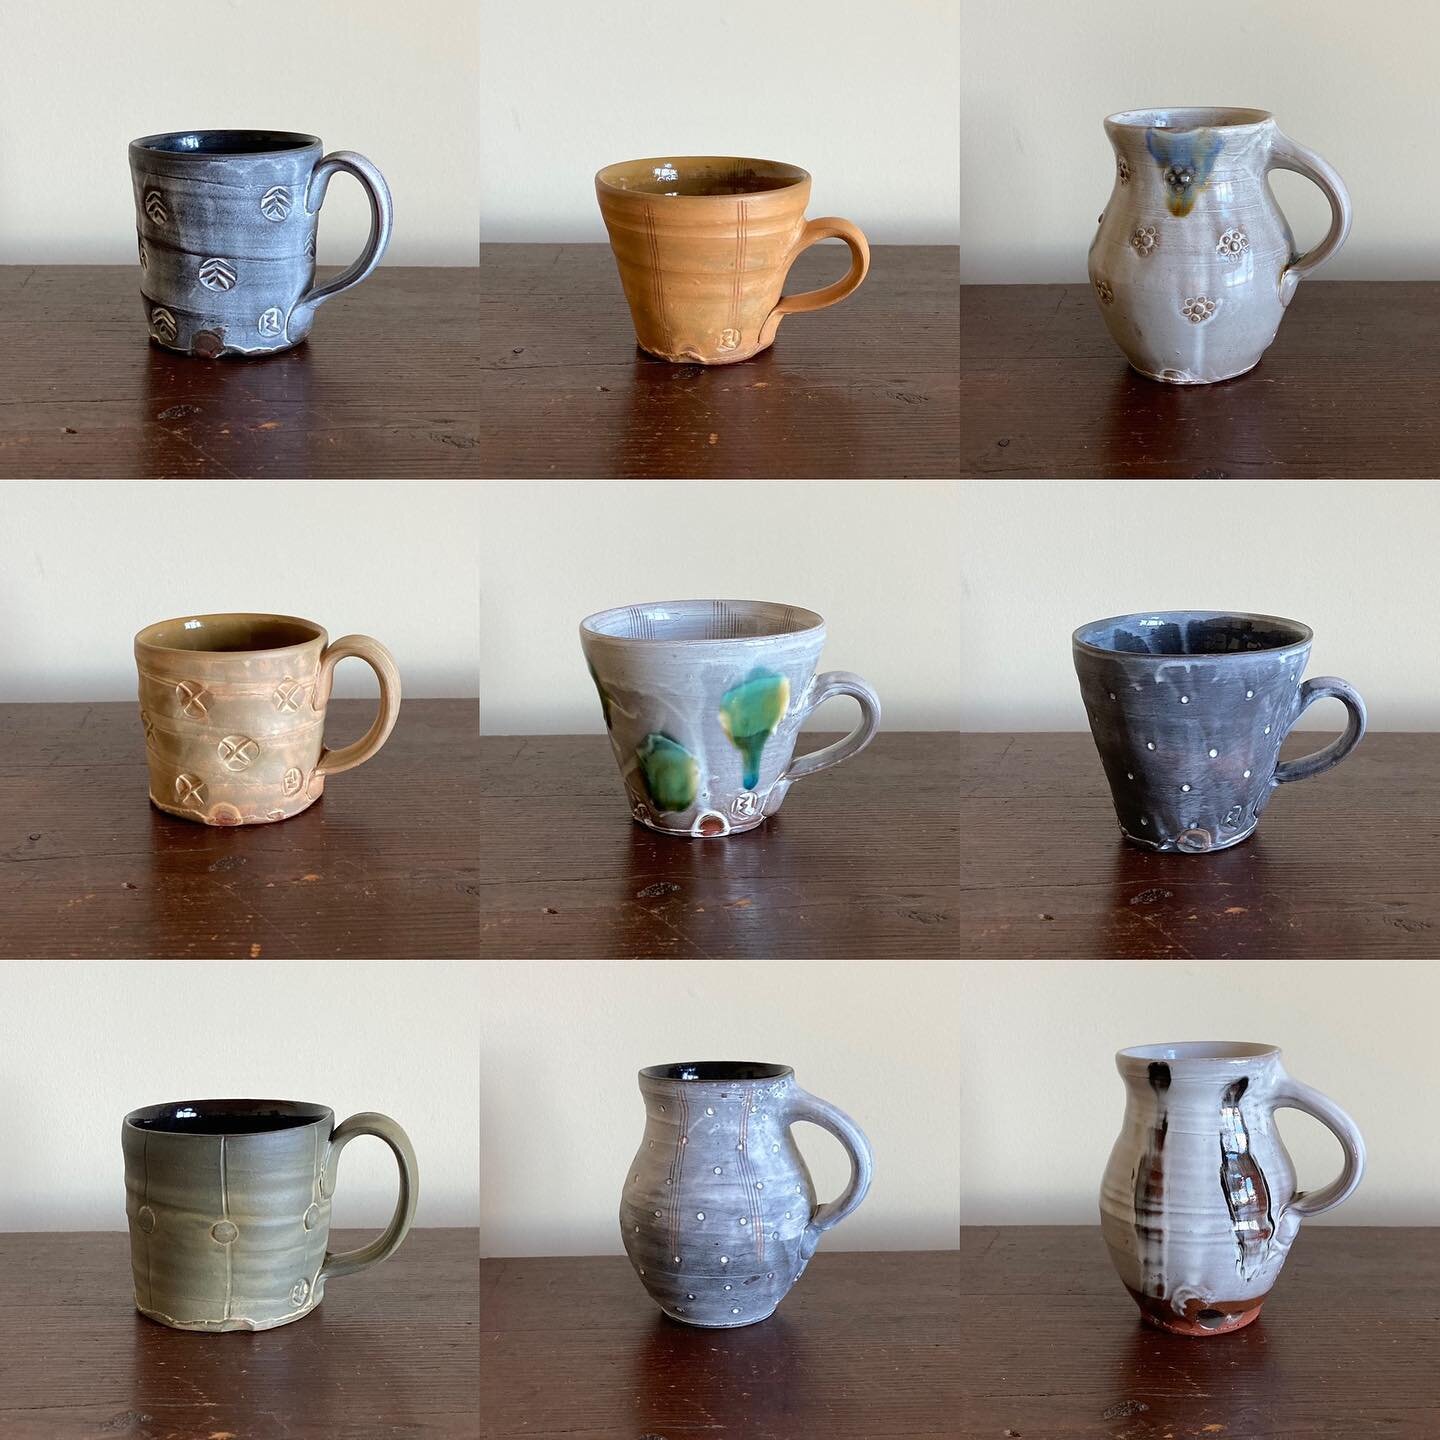 In the past I&rsquo;ve strived for a really cohesive body of work, but this making cycle has been all about exploration as I try out new materials and surfaces. Here&rsquo;s a small sample of the variety of mugs I&rsquo;m packing up for  @stcroixvall